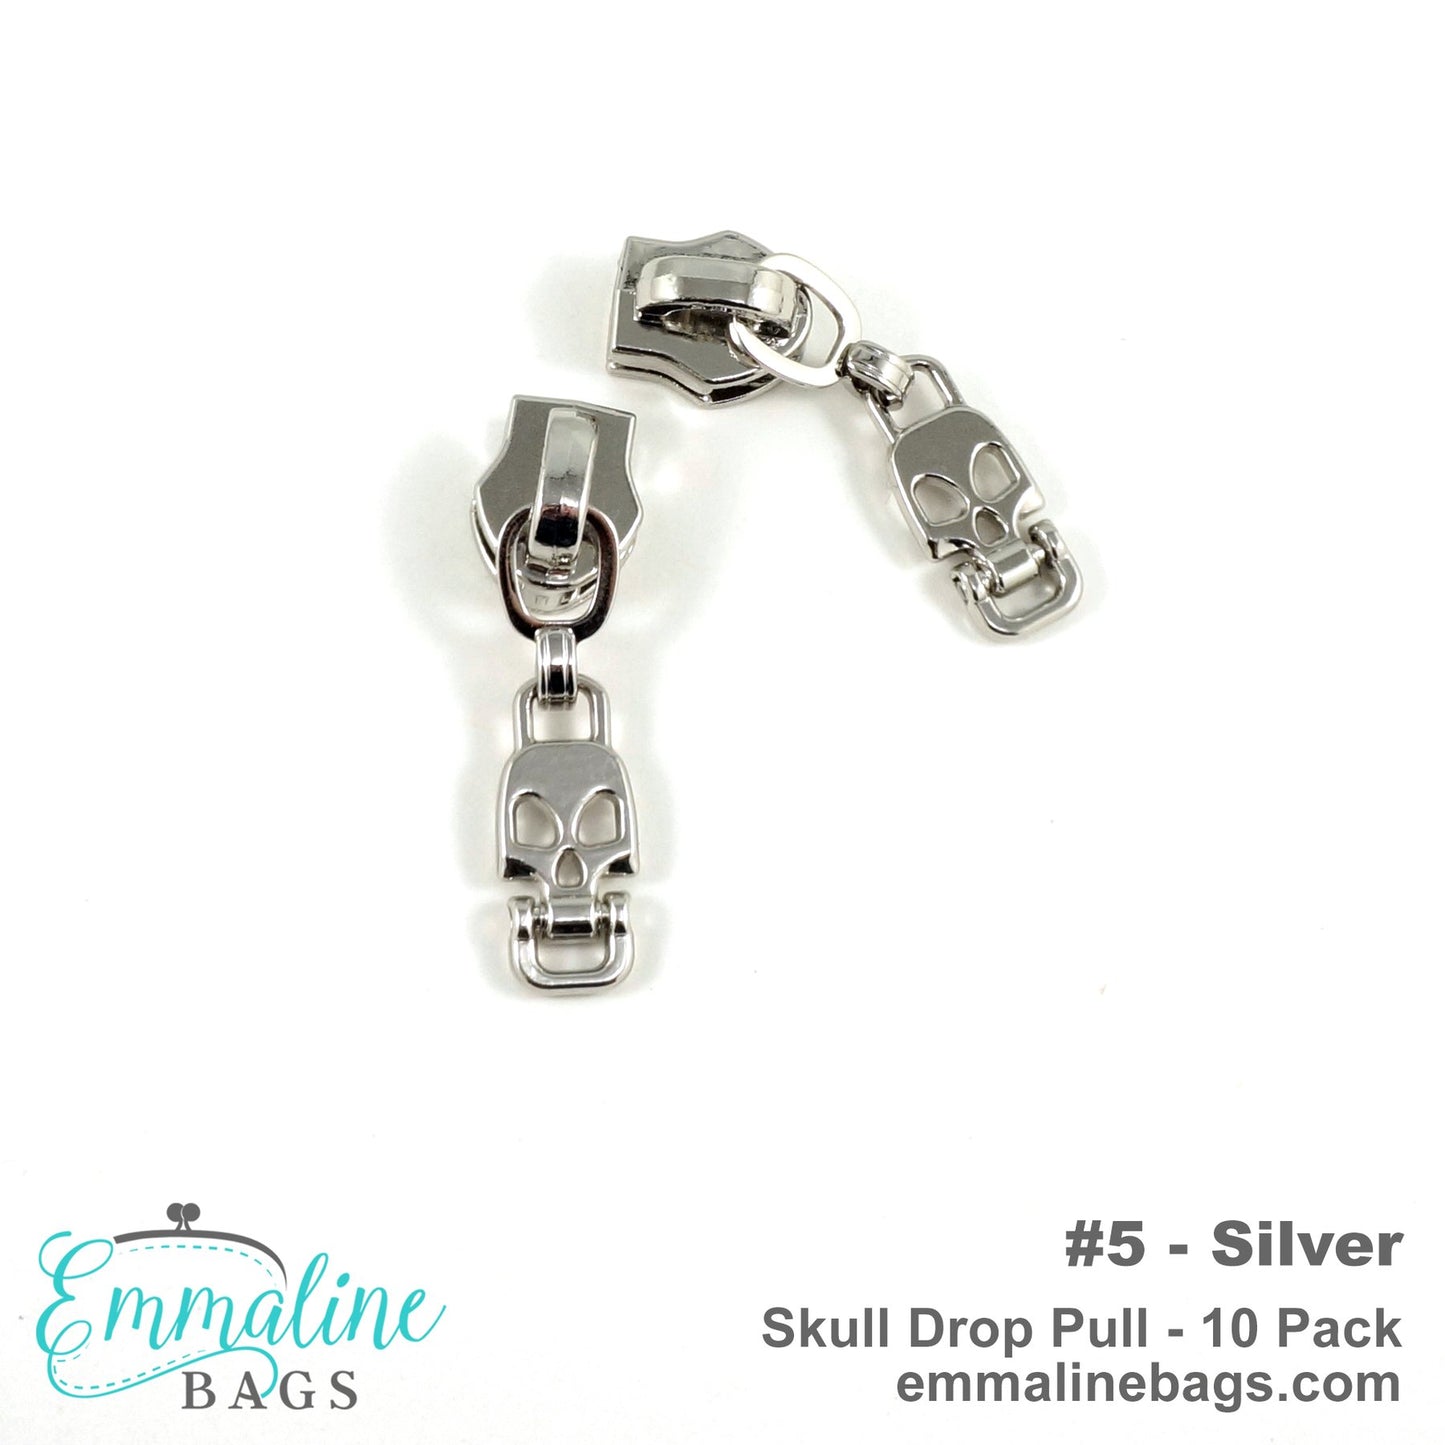 Zipper Sliders with Pulls - Size #5 - Skull Drop Pull/ Silver